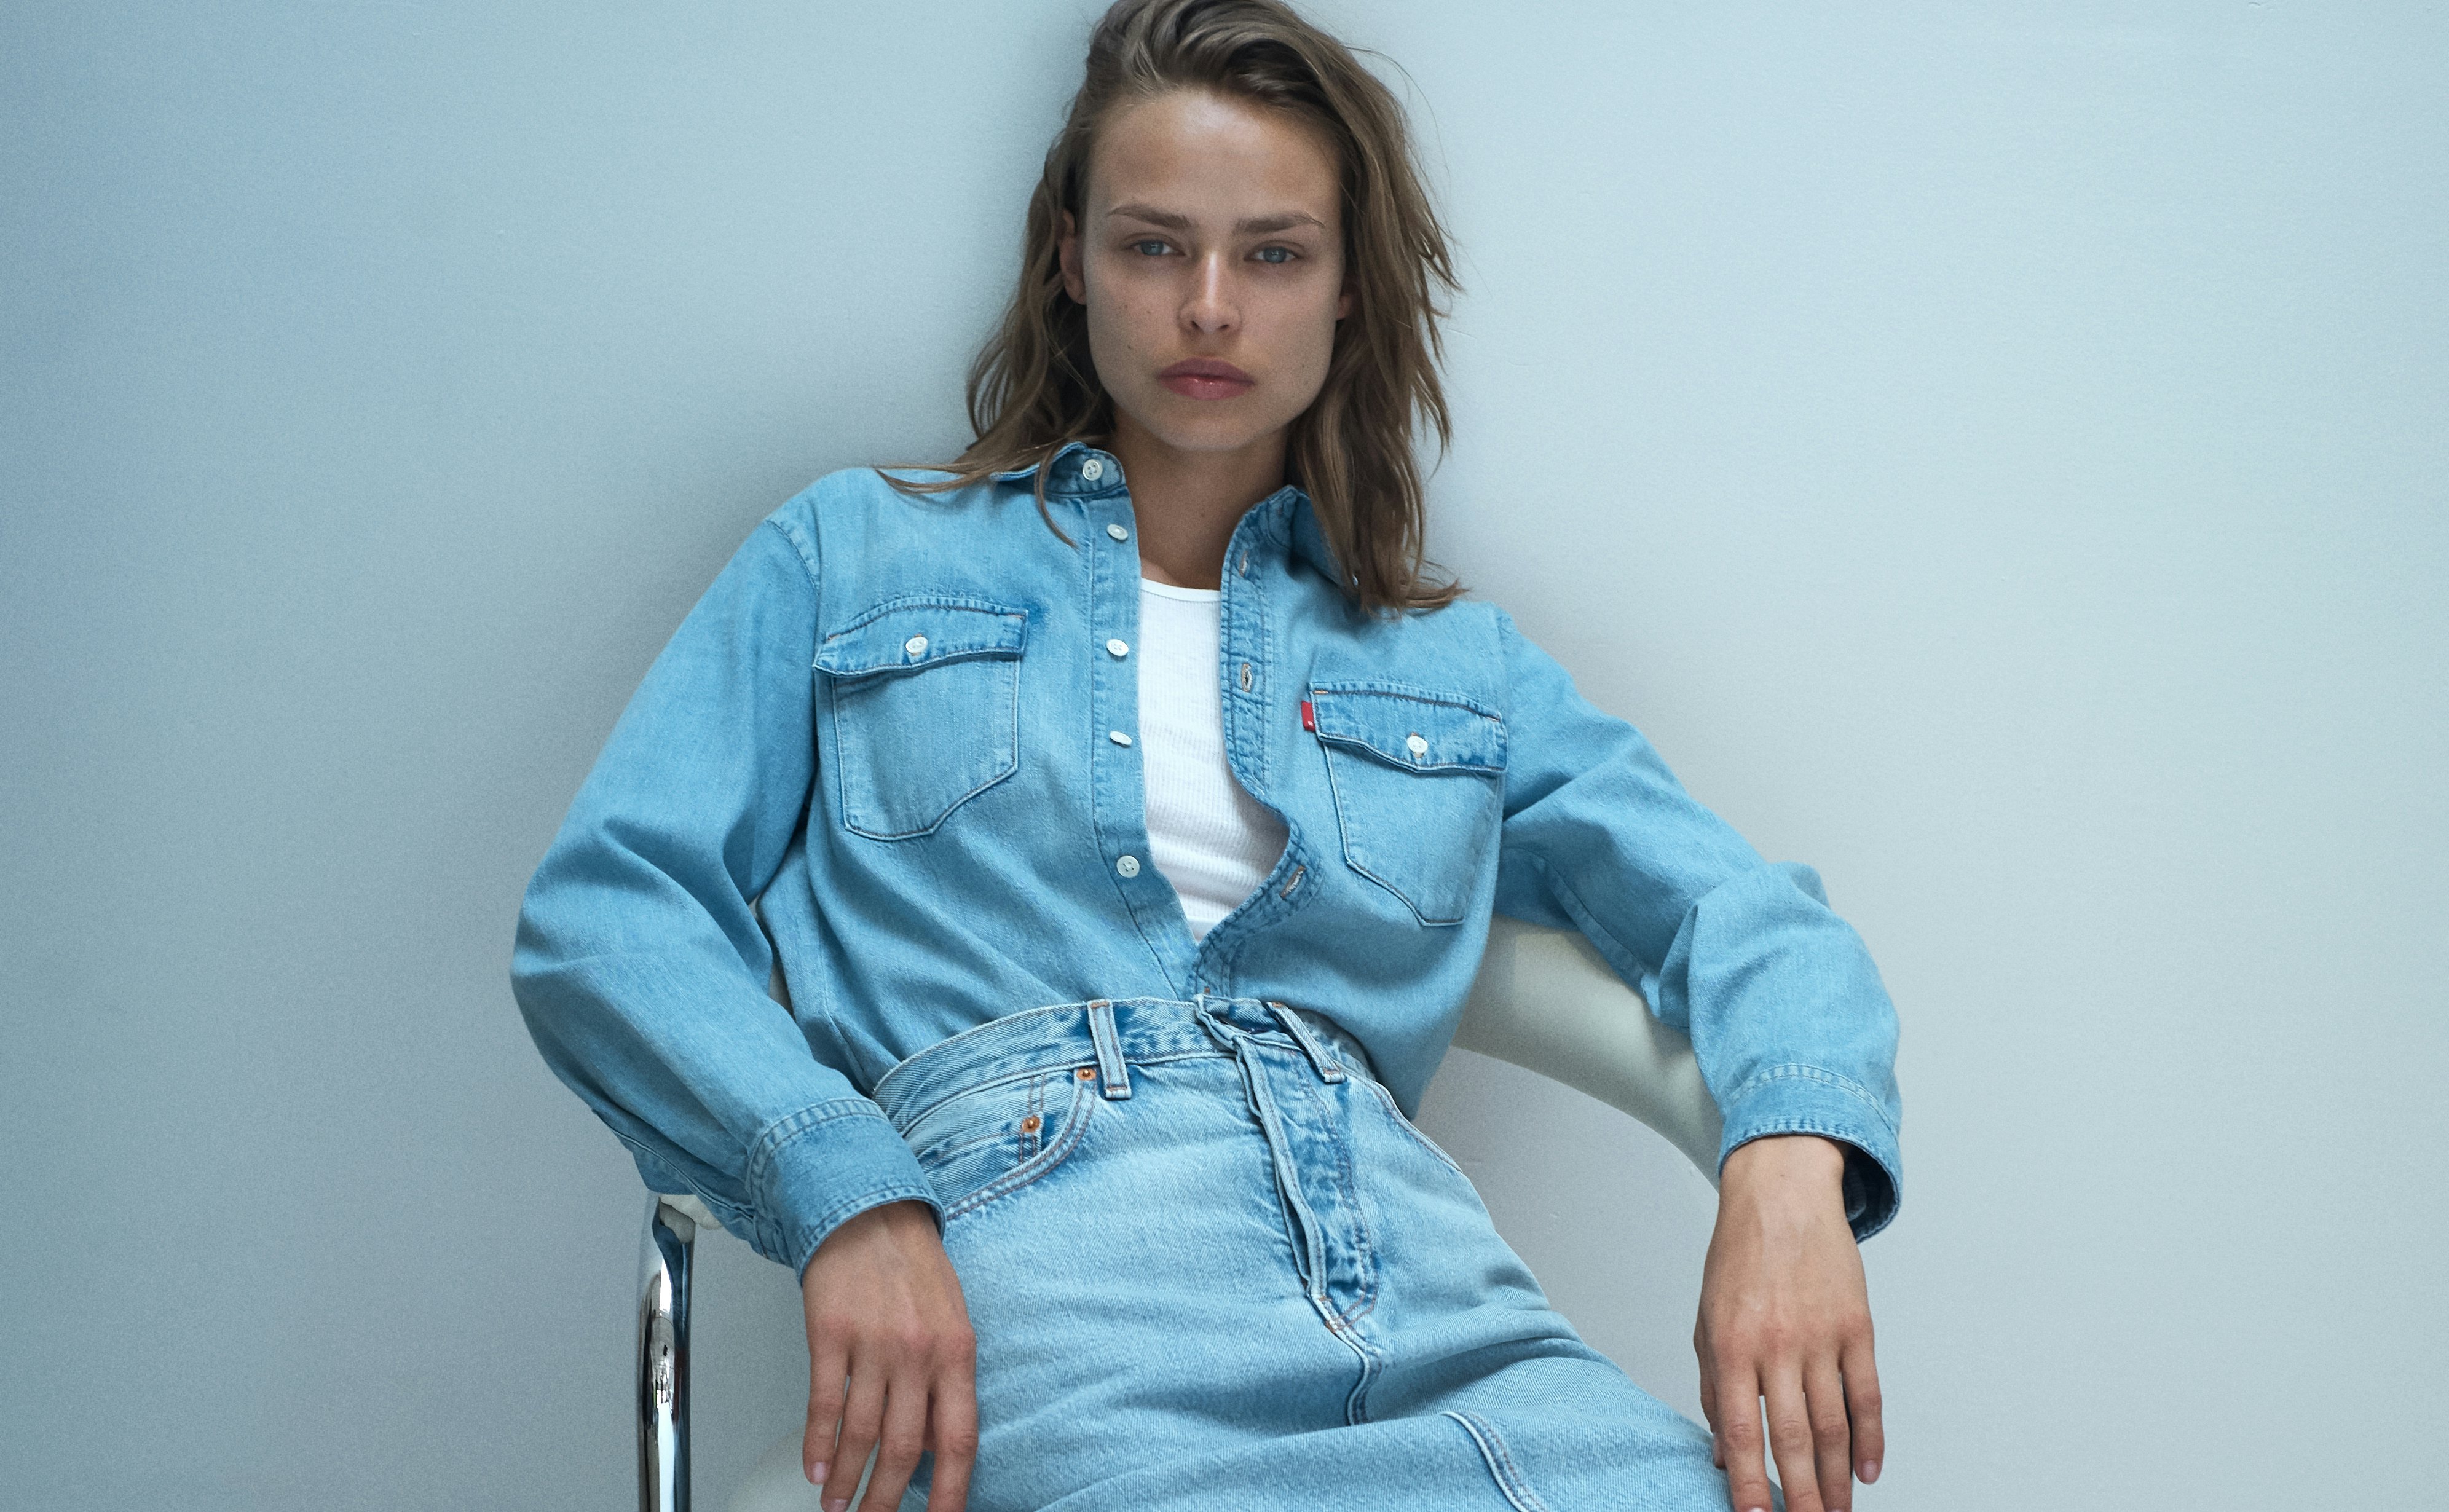 The WARDROBE.NYC x Levi's Collab Features A New Way To Shop These 